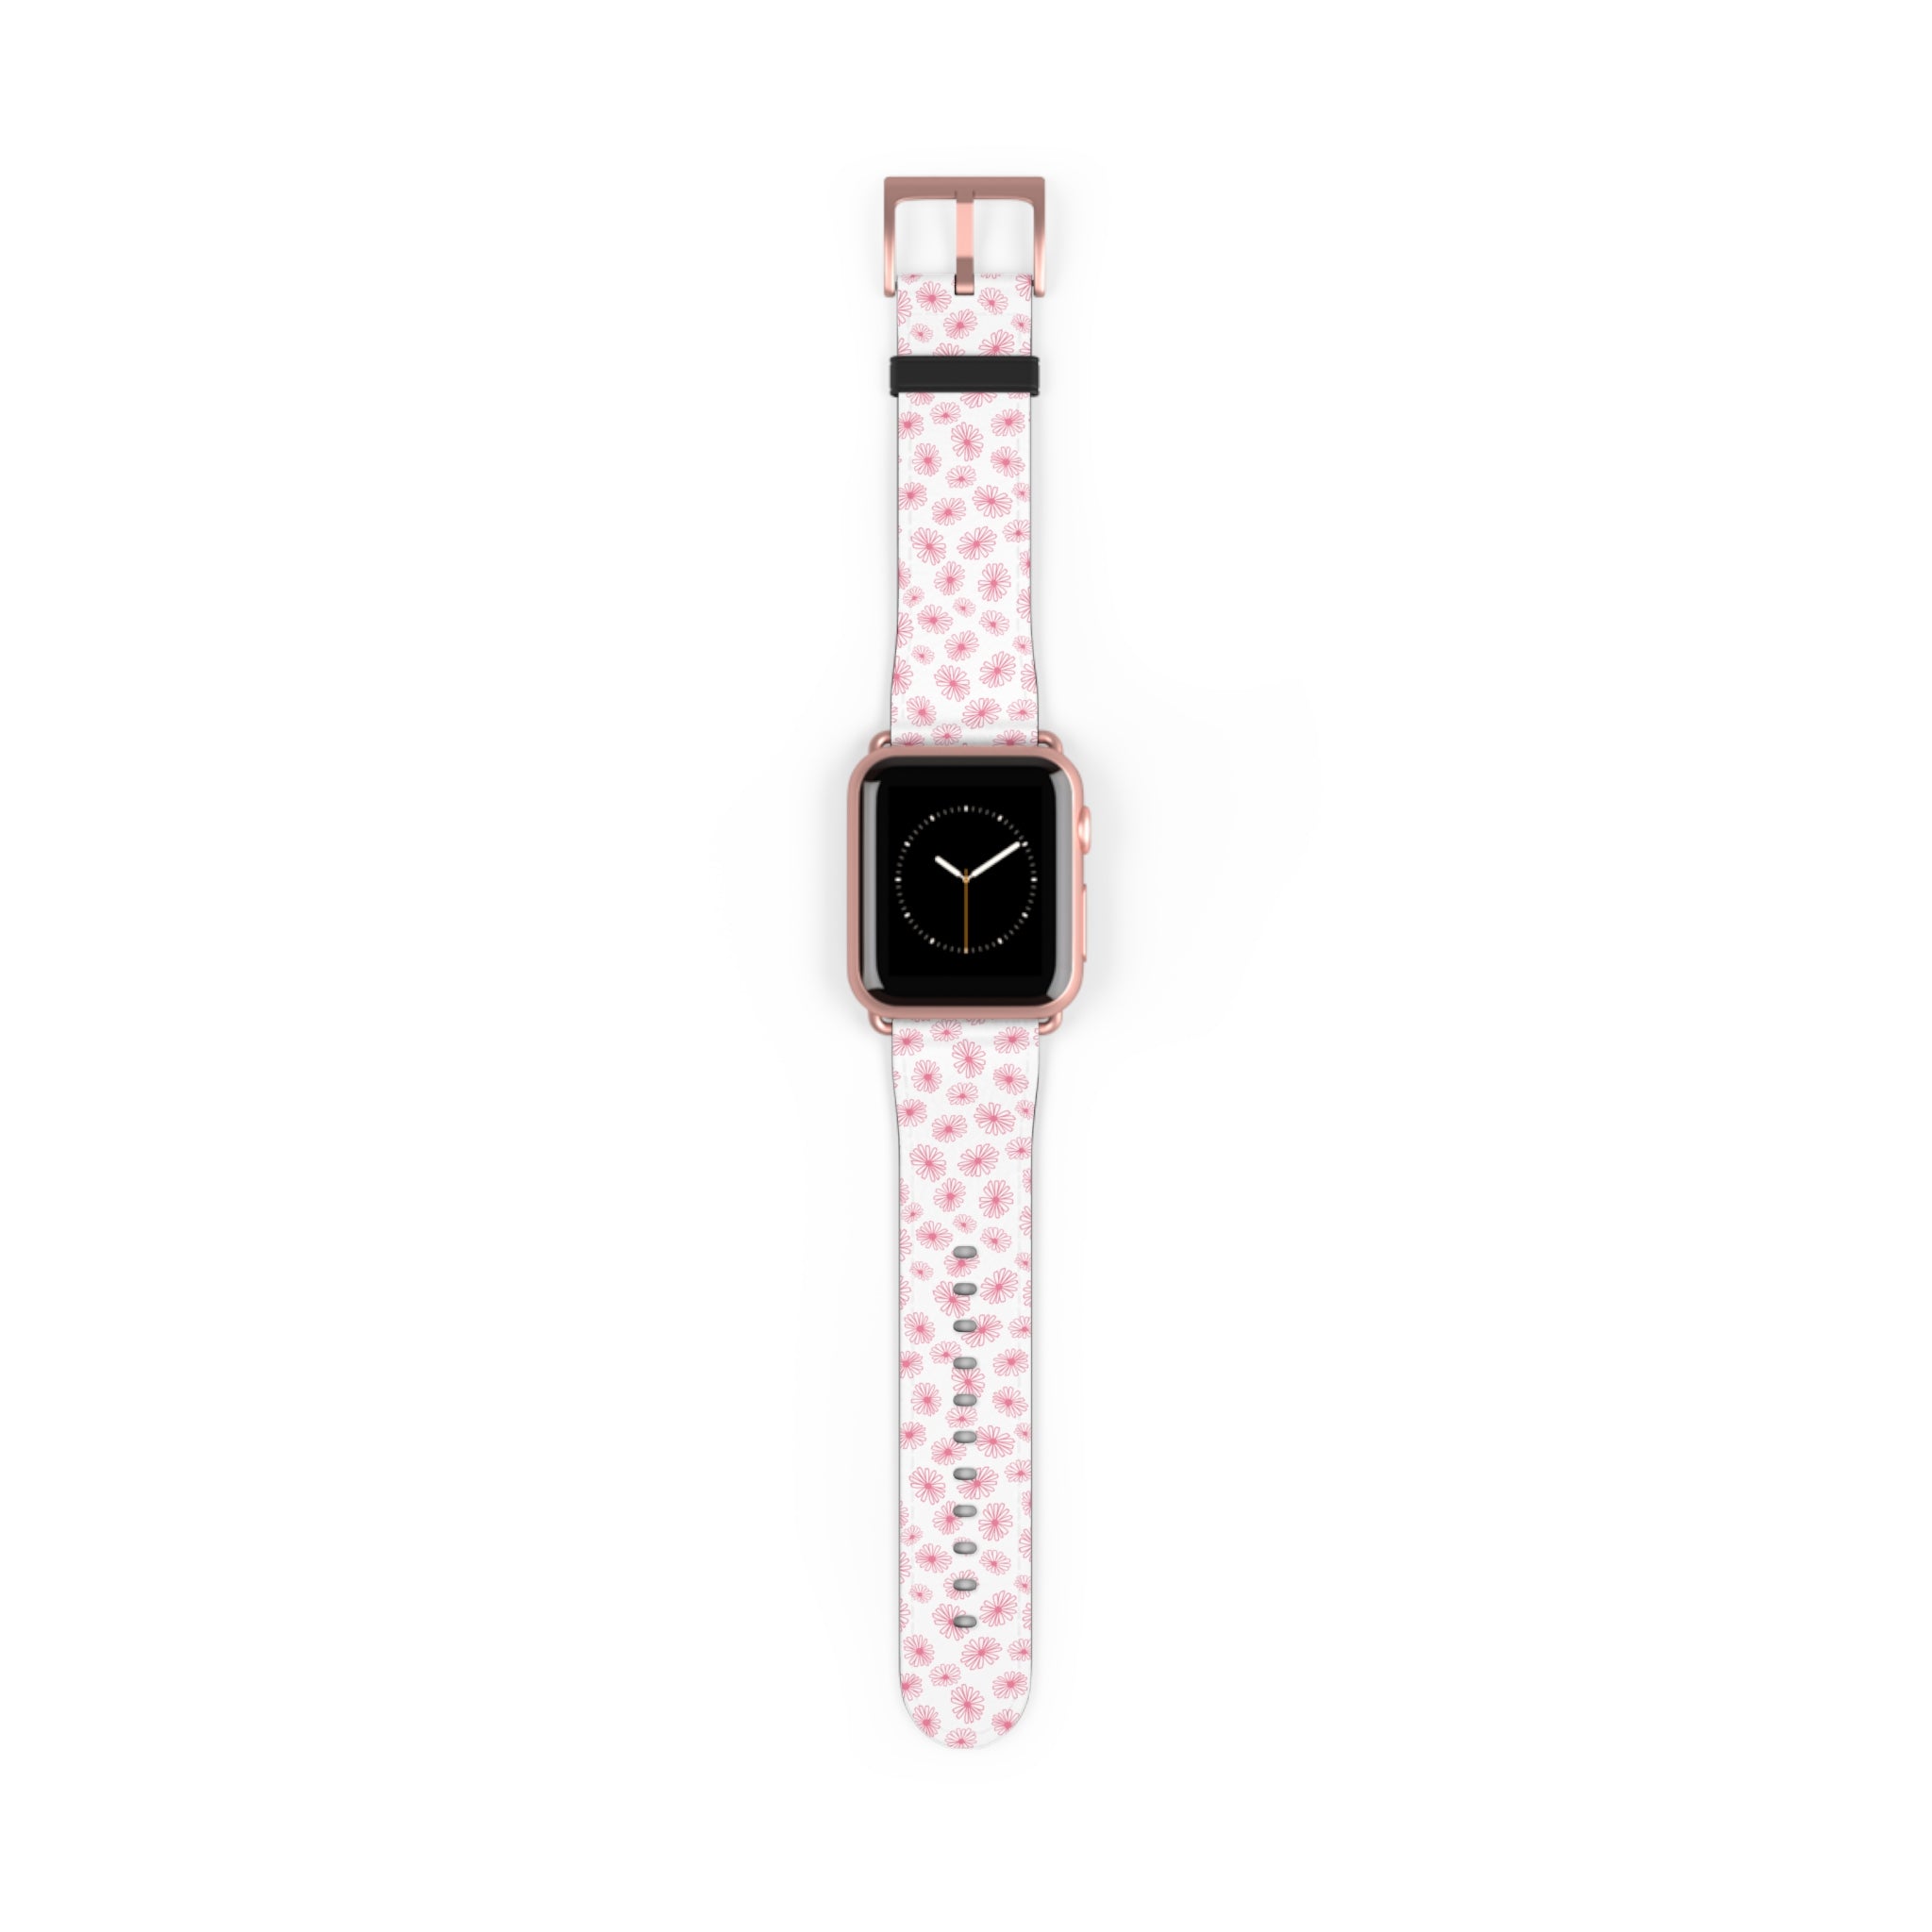 Daisy Apple Watch Leather Band – The Ambiguous Otter